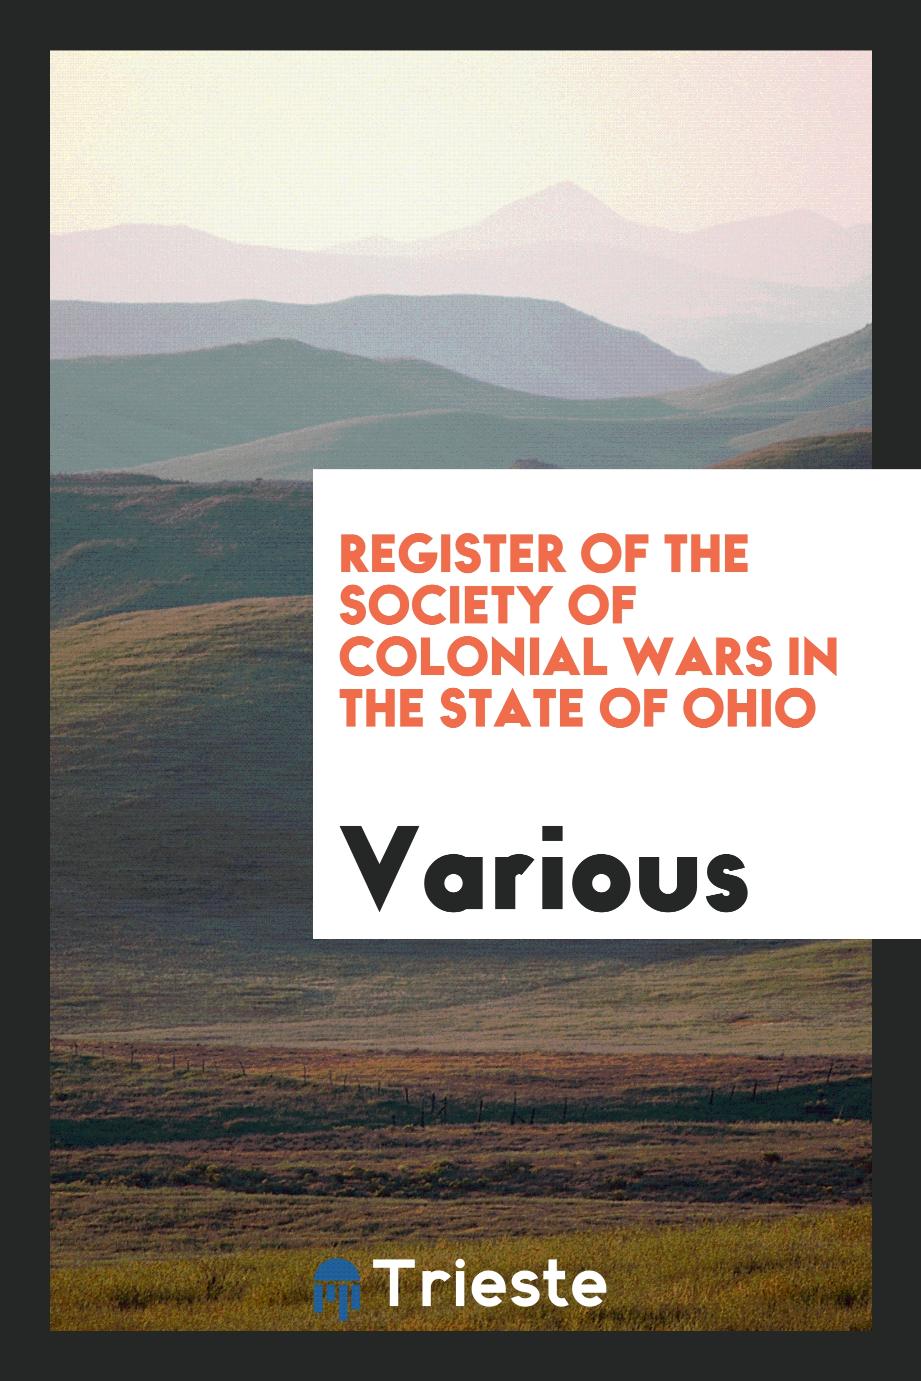 Register of the Society of Colonial Wars in the State of Ohio